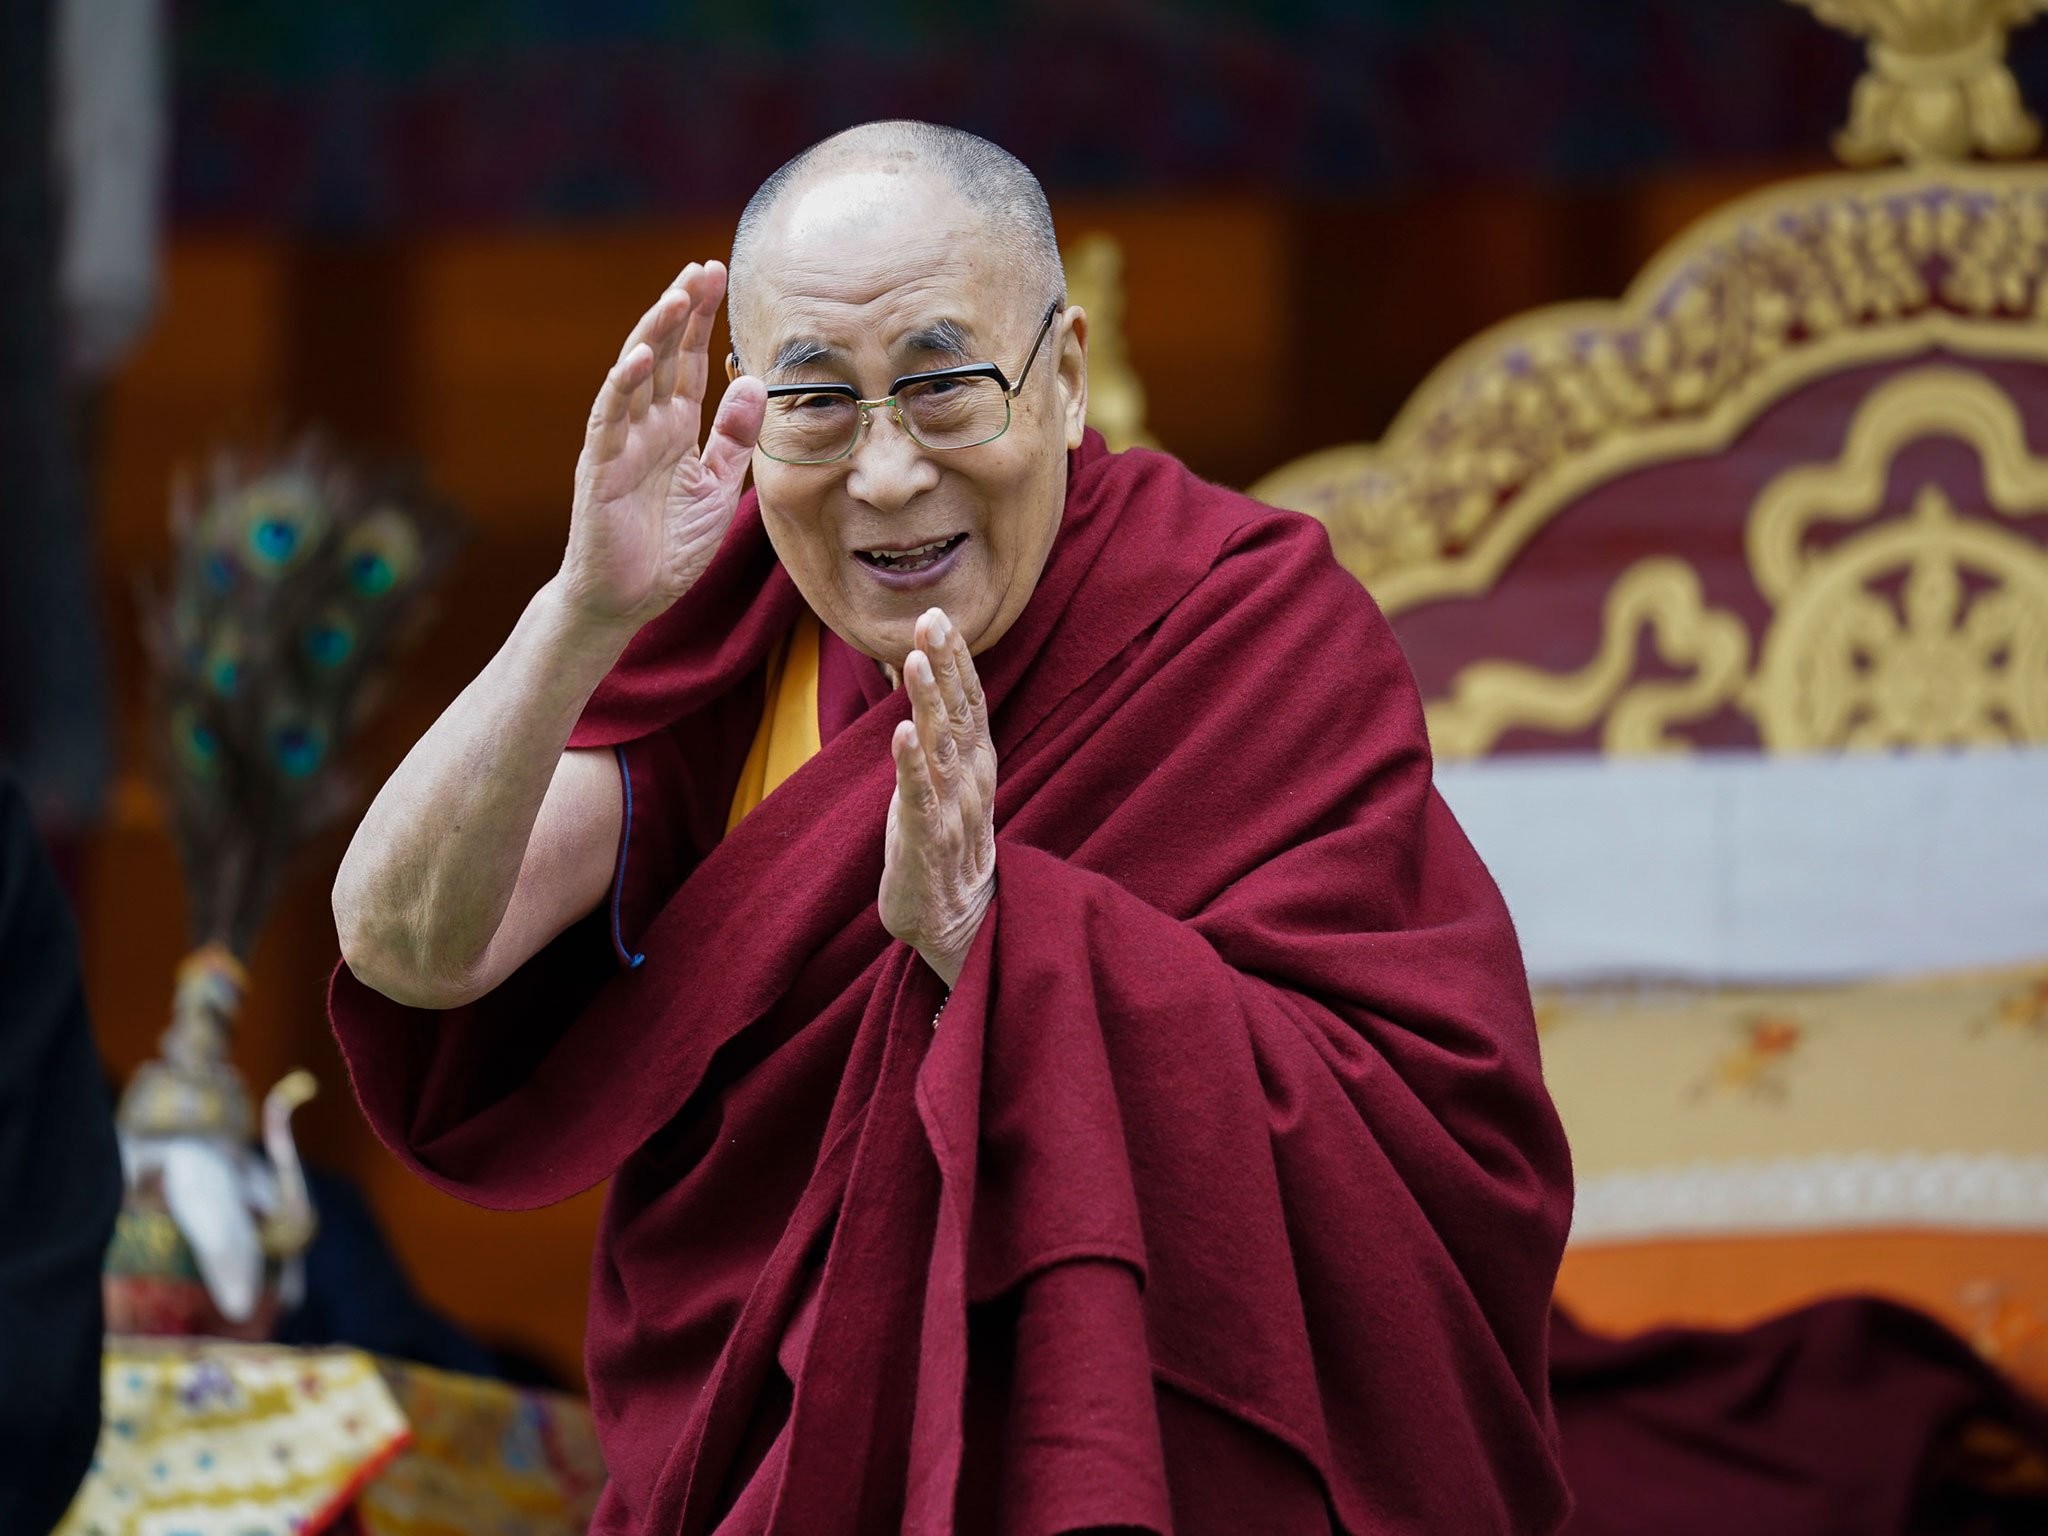 2048x1536 Dalai Lama says 'Europe belongs to the Europeans' and suggests refugees  return to native countries | The Independent